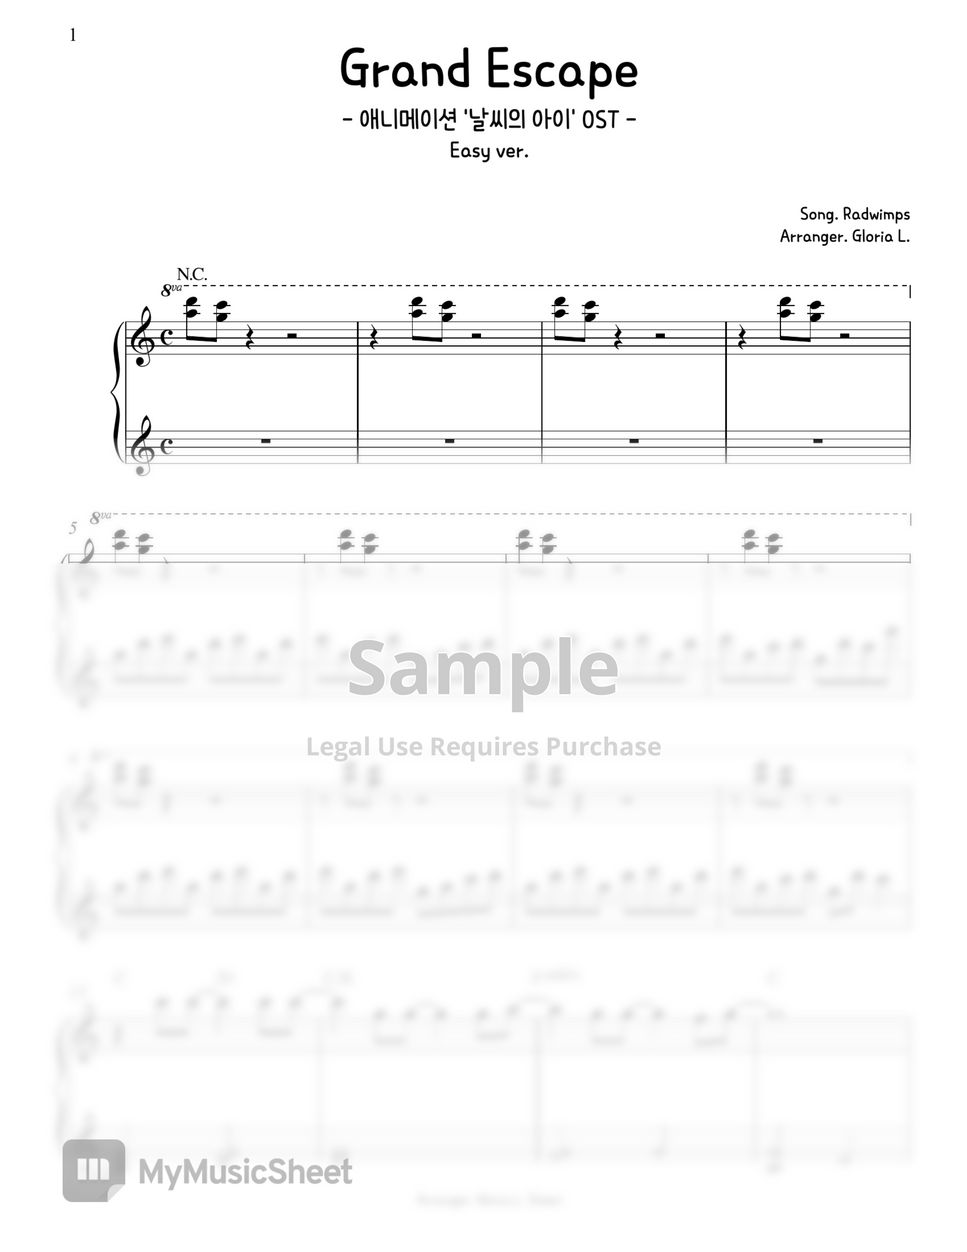 Weathering With You (날씨의 아이) OST - Grand Escape (グランドエスケープ) Easy Piano Sheet (Easy Transposition key) by. Gloria L.